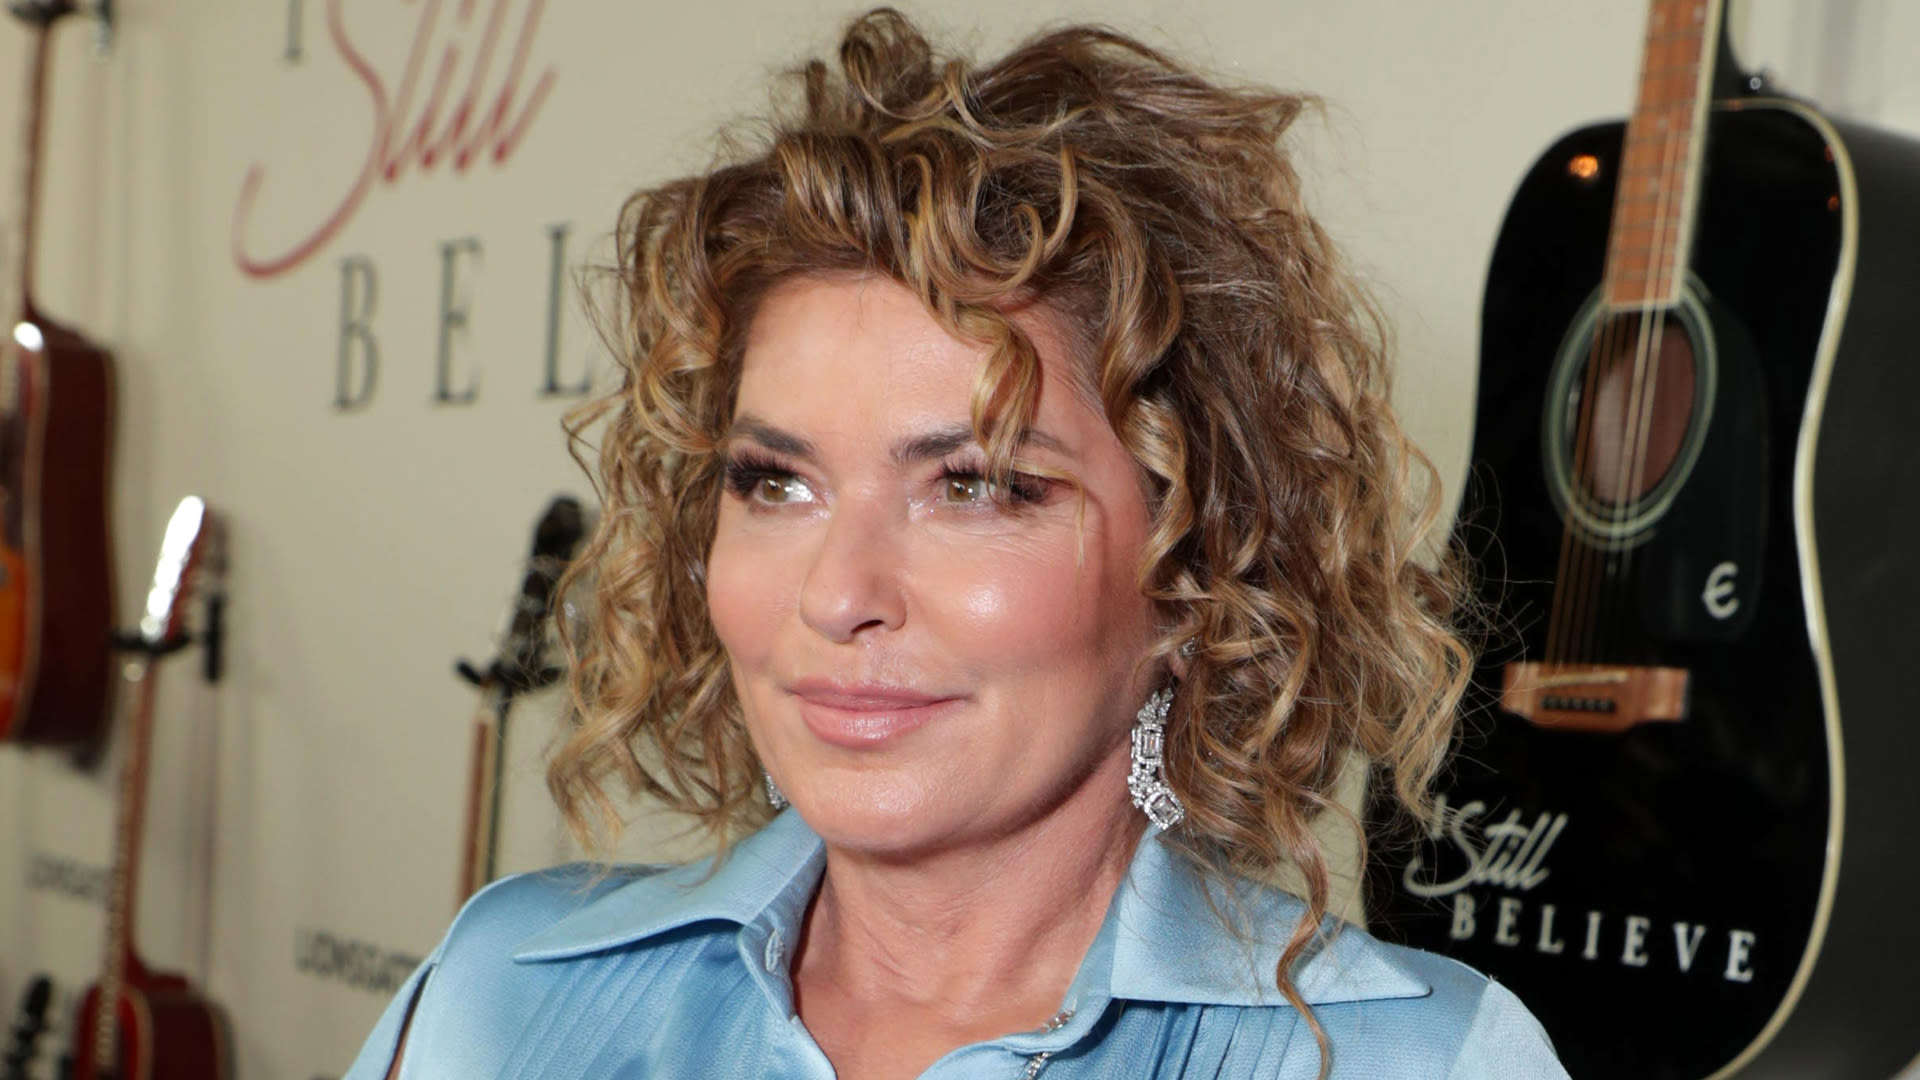 Shania Twain's '$78k new look is very different' - Botox was her 'gateway drug'